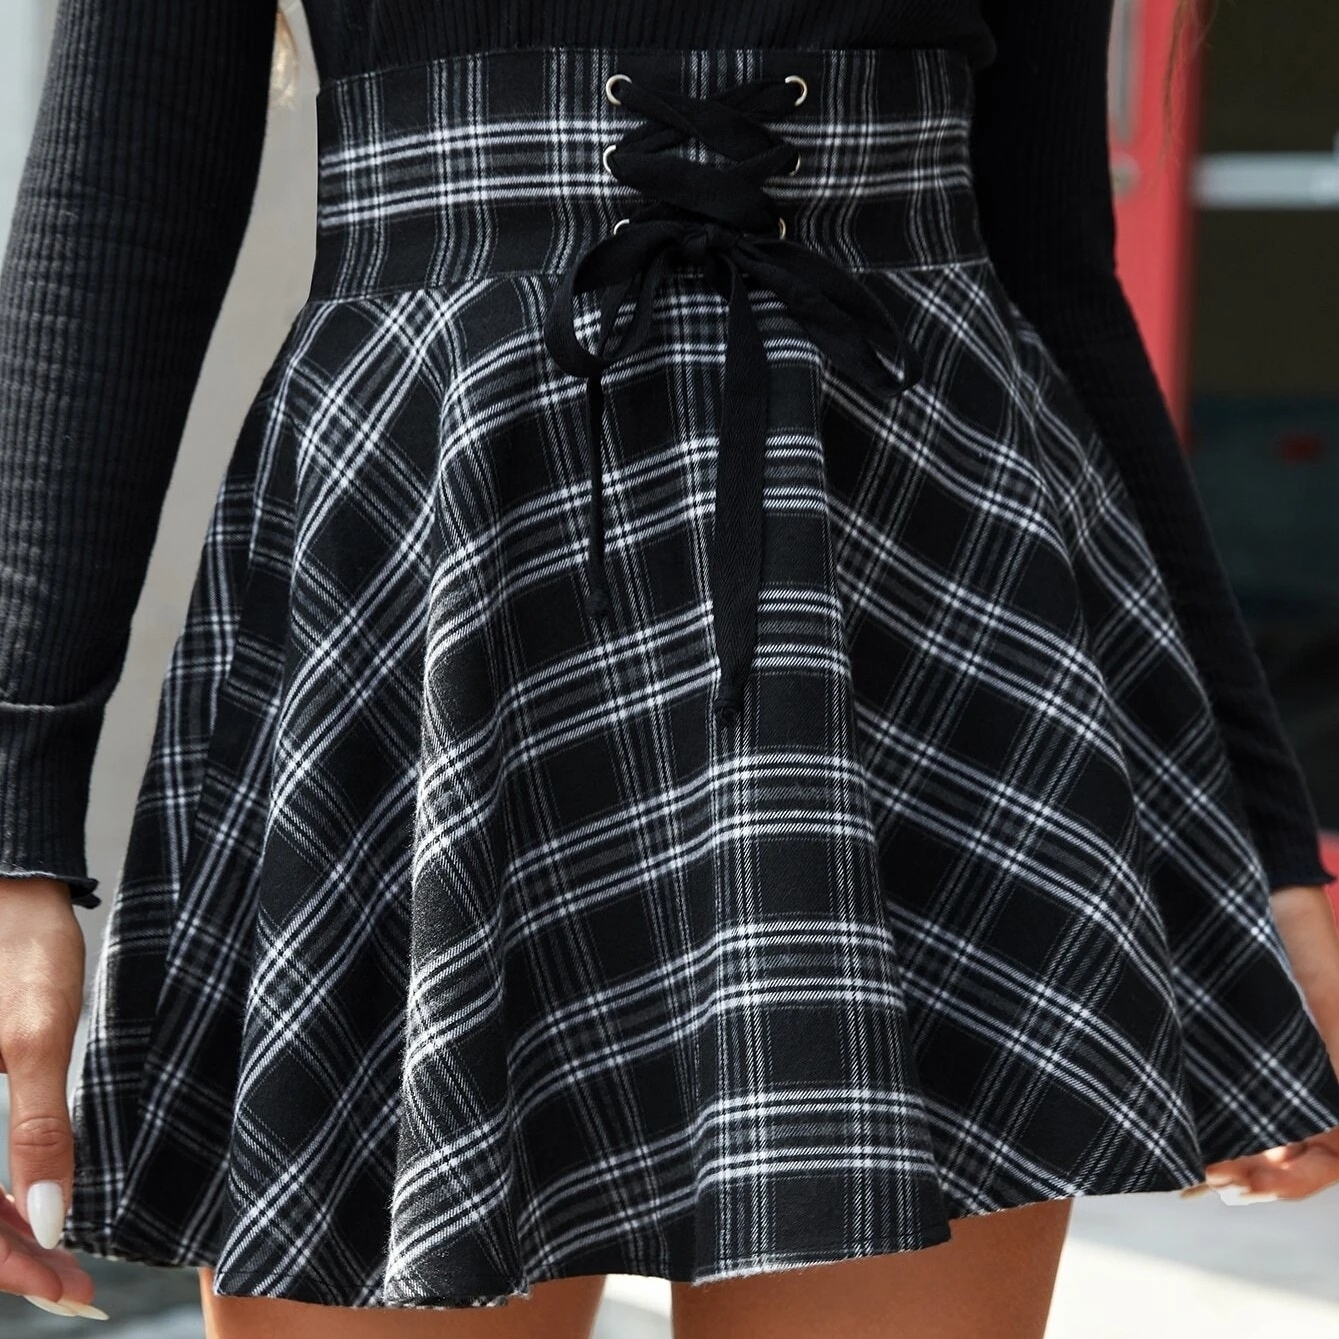 Tartan Print Lace Up Front Flared Skirt - M